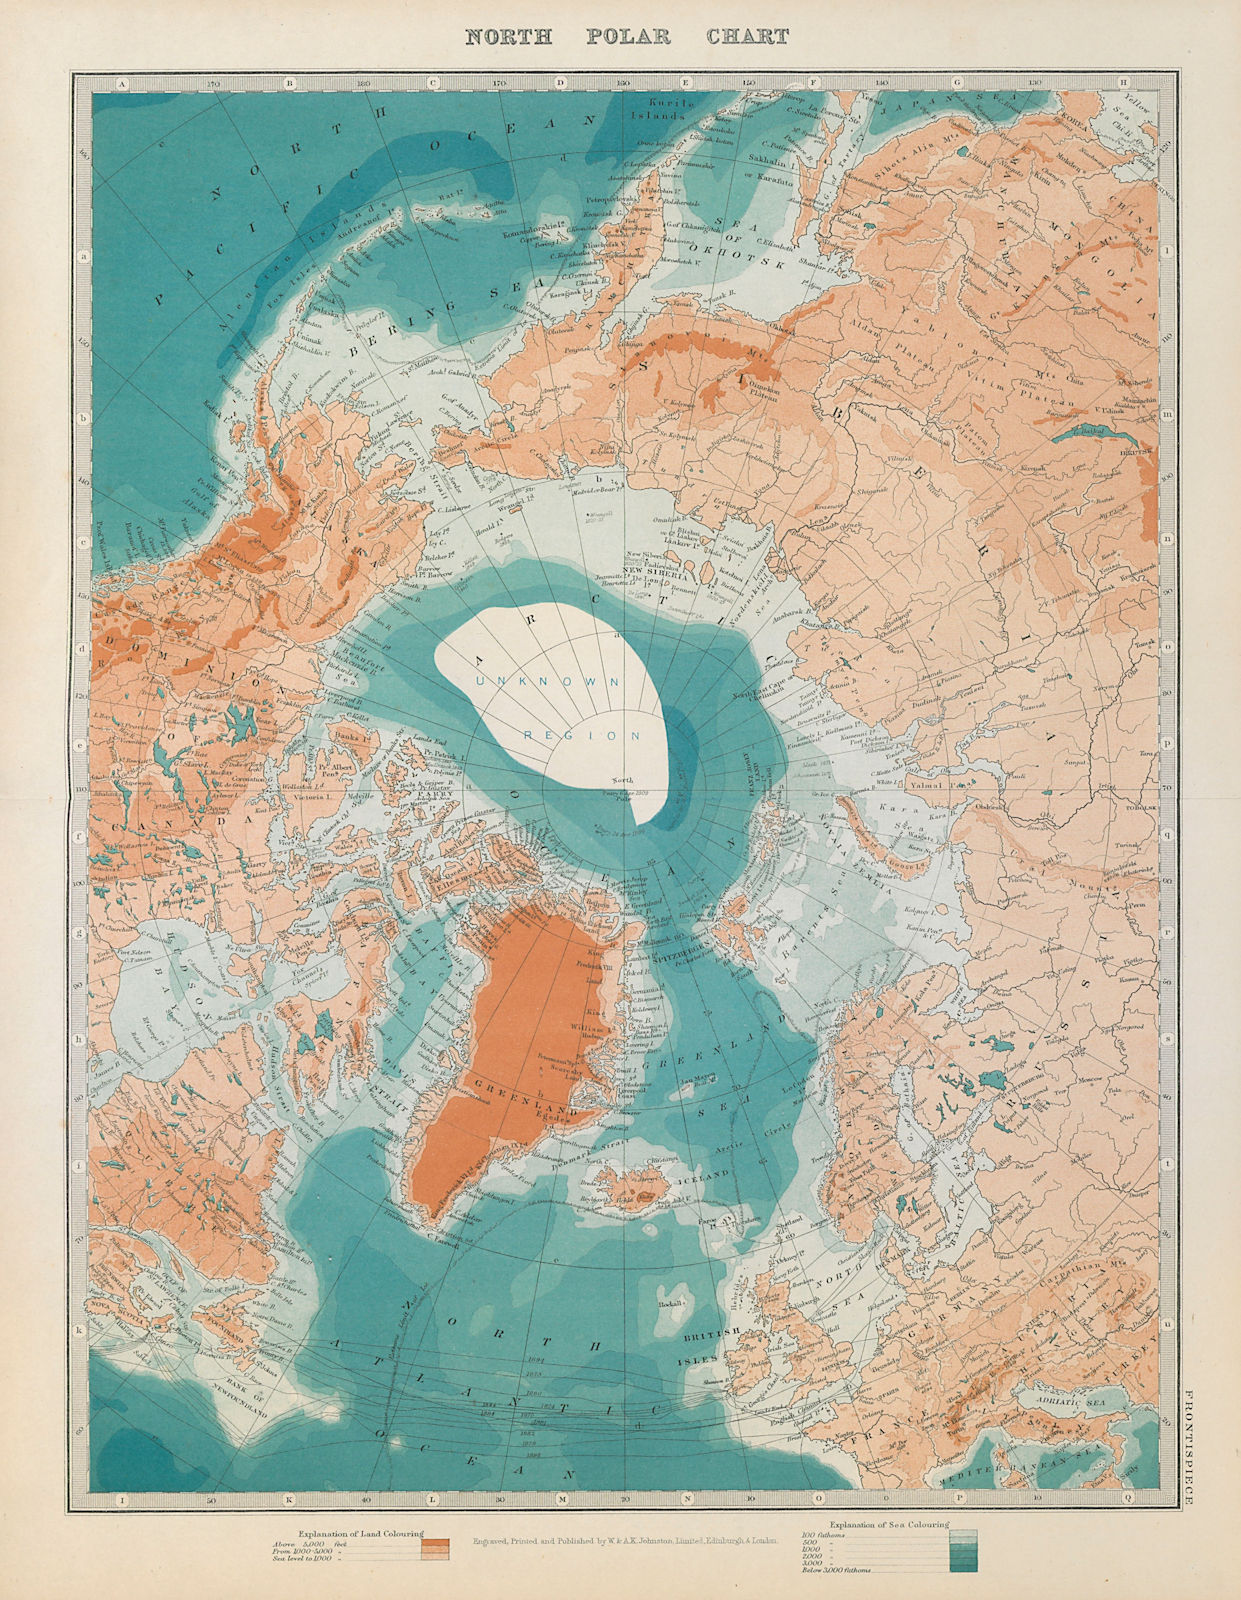 ARCTIC. Show's Peary claim to have reached North Pole. JOHNSTON 1915 old map